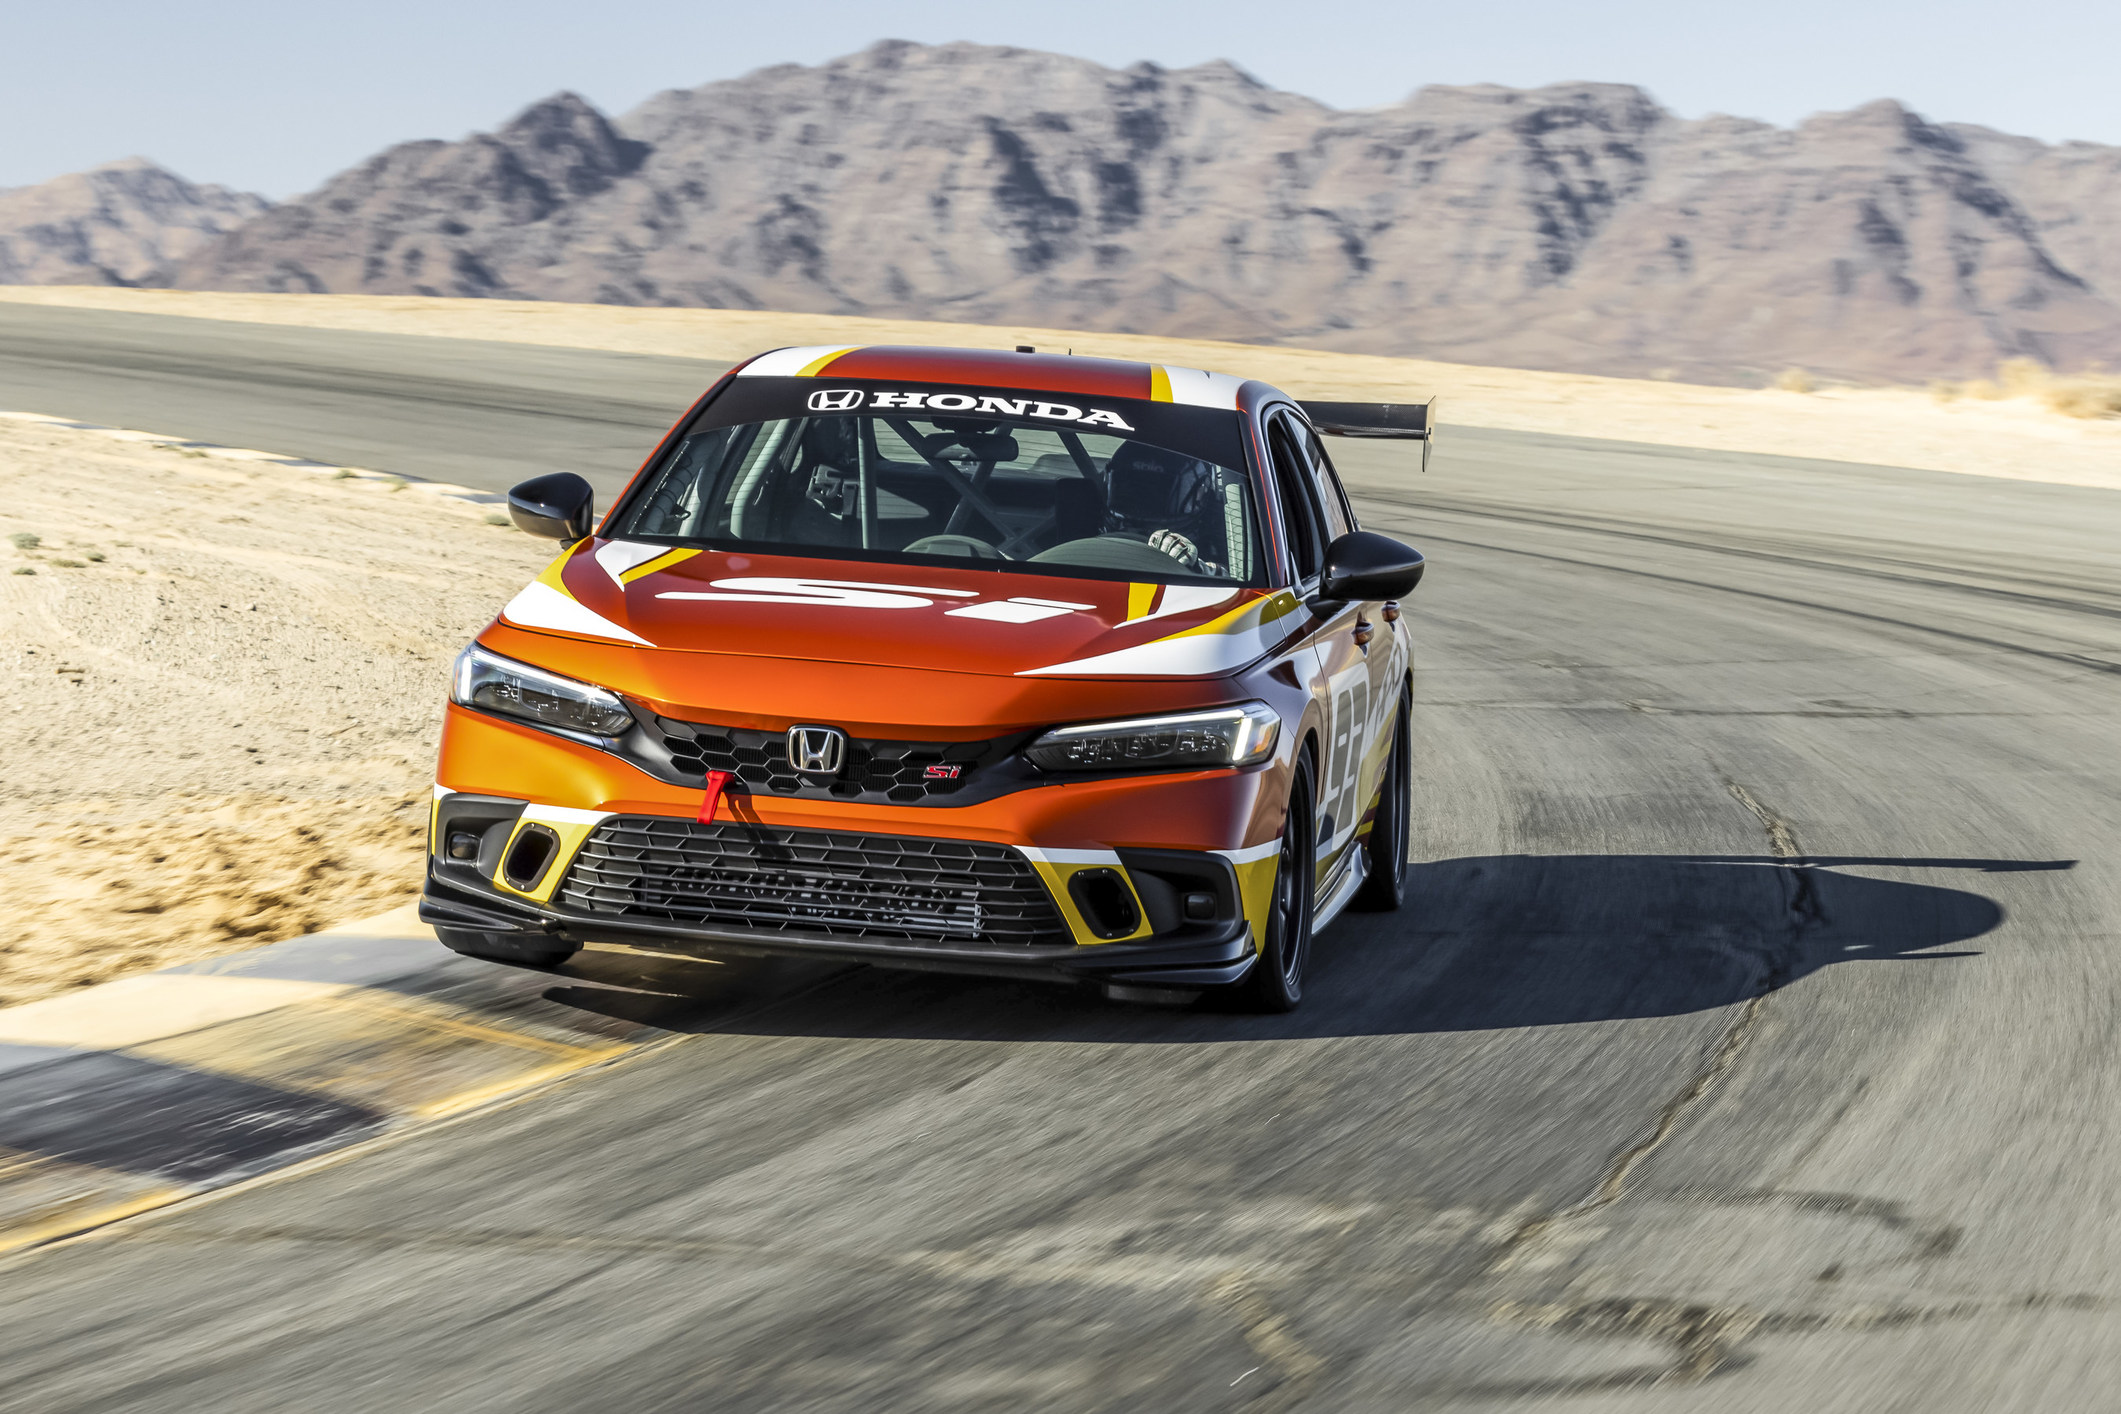 Start Your Engines: Honda Returns to SEMA with Debut of 2022 Civic Si Race  Cars Alongside Rugged Overlanding Trucks